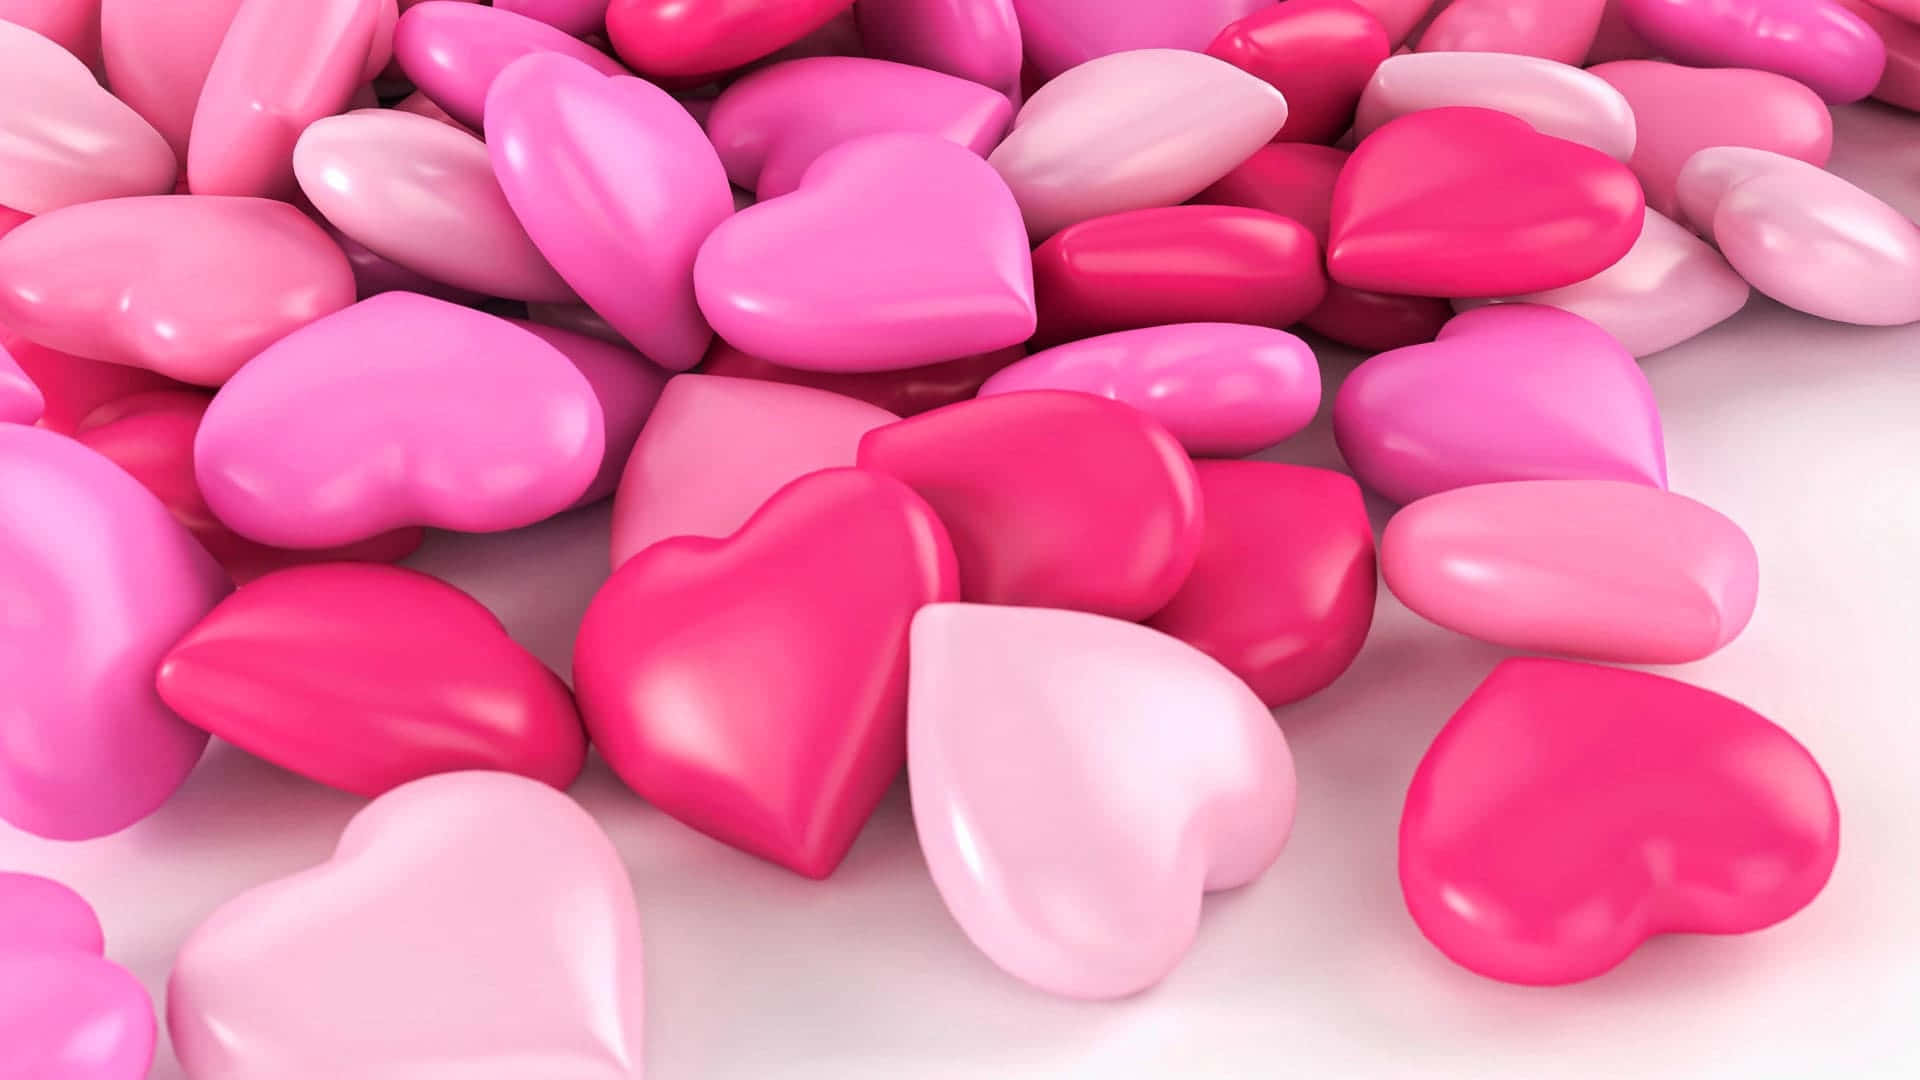 A Pile Of Pink And Pink Hearts On A White Surface Wallpaper